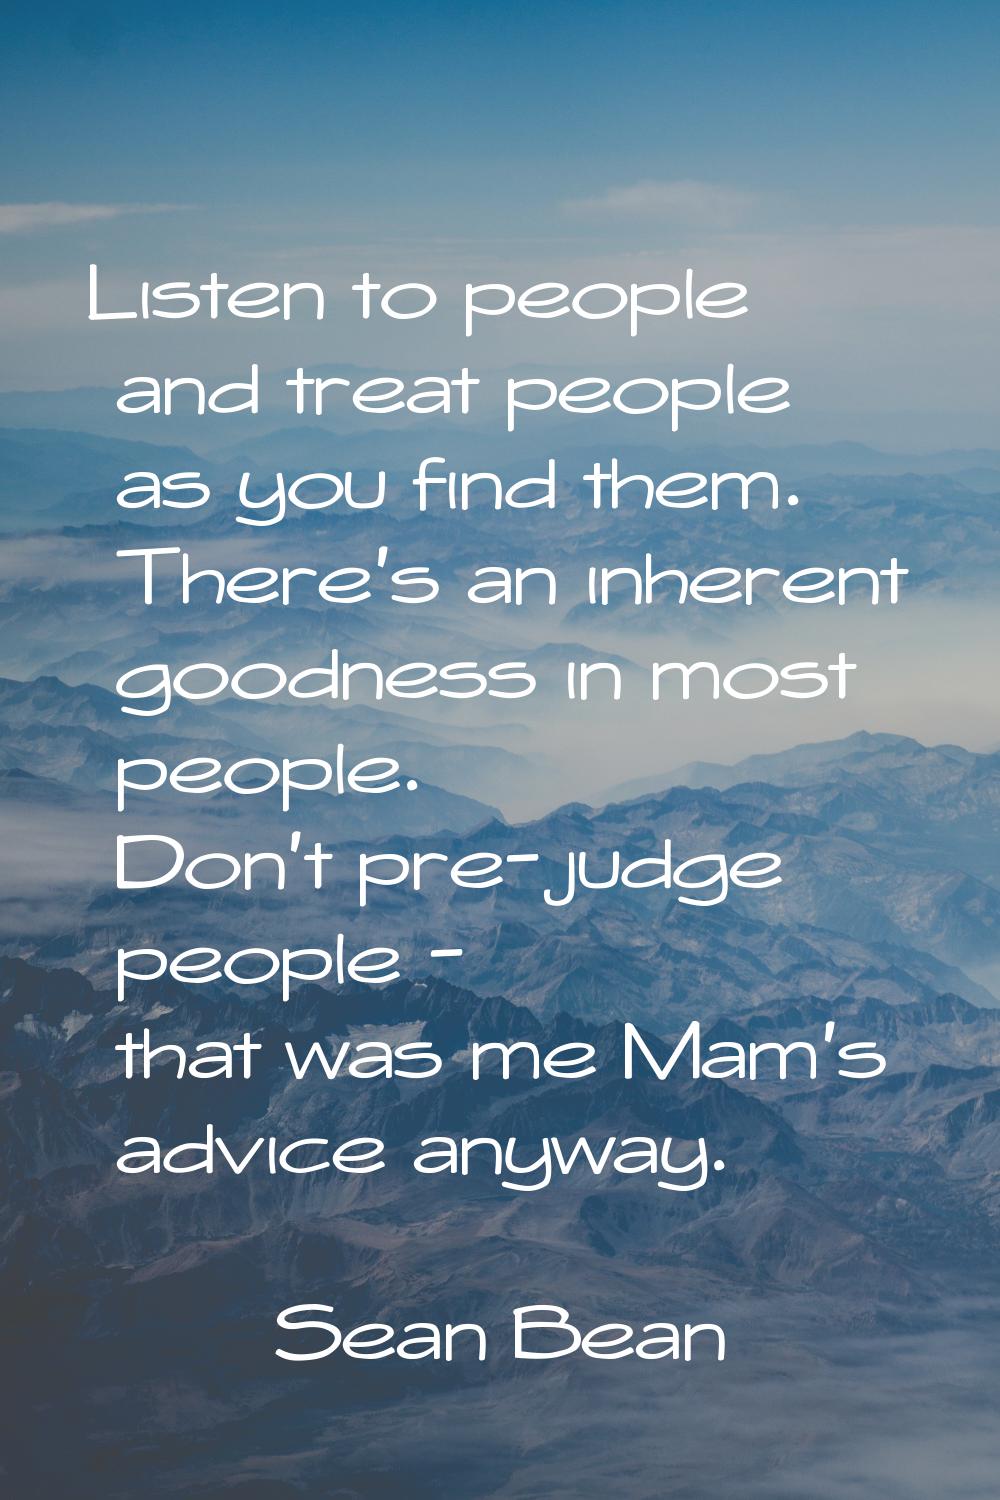 Listen to people and treat people as you find them. There's an inherent goodness in most people. Do